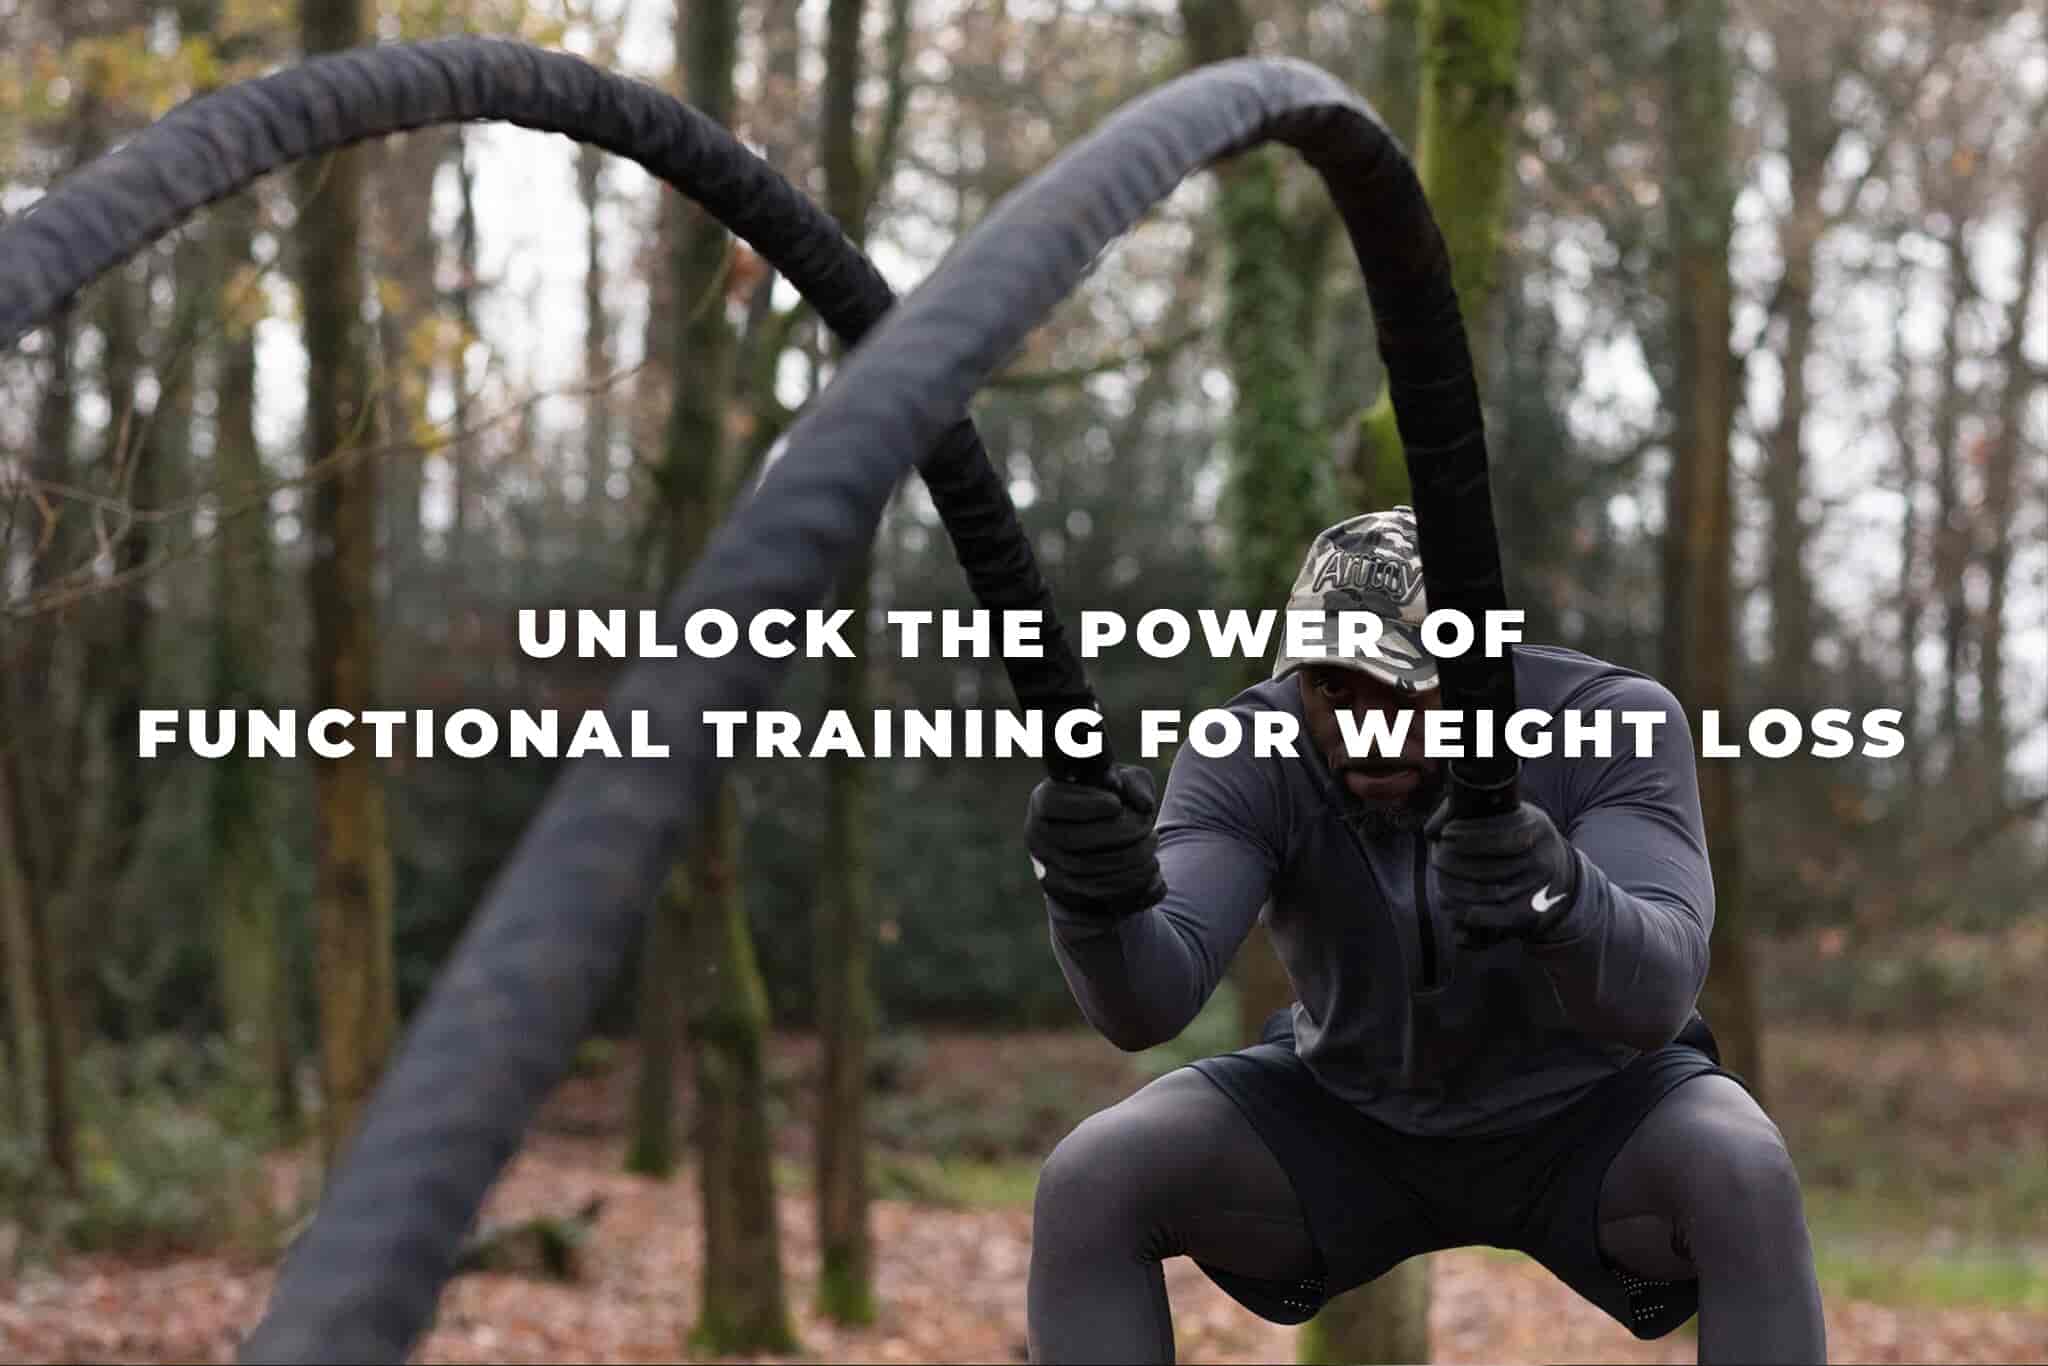 Unlock the power of functional training for weight loss